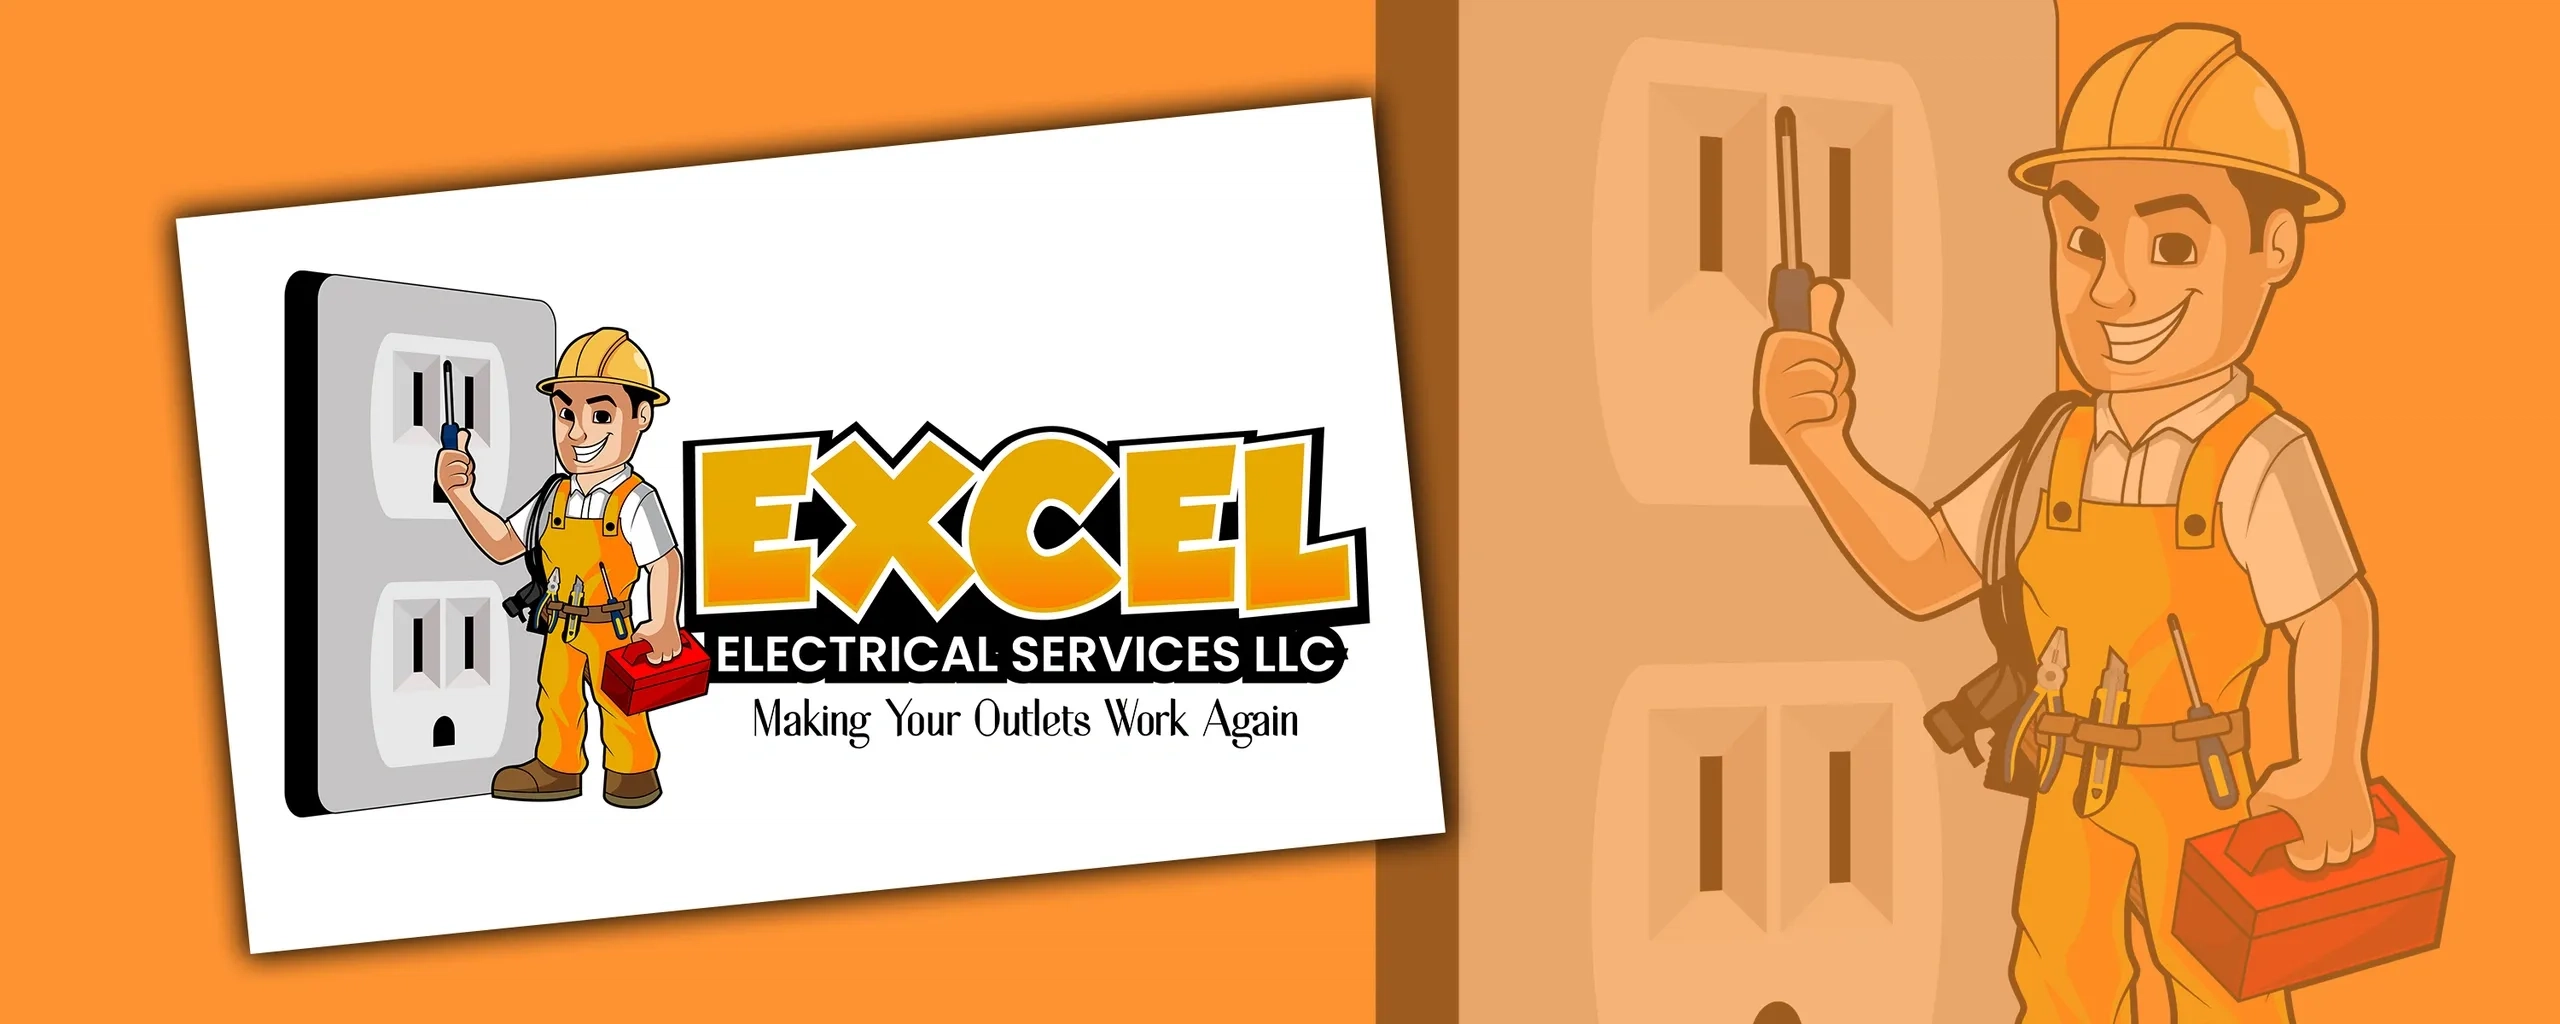 Excel Electrical Services LLC Logo